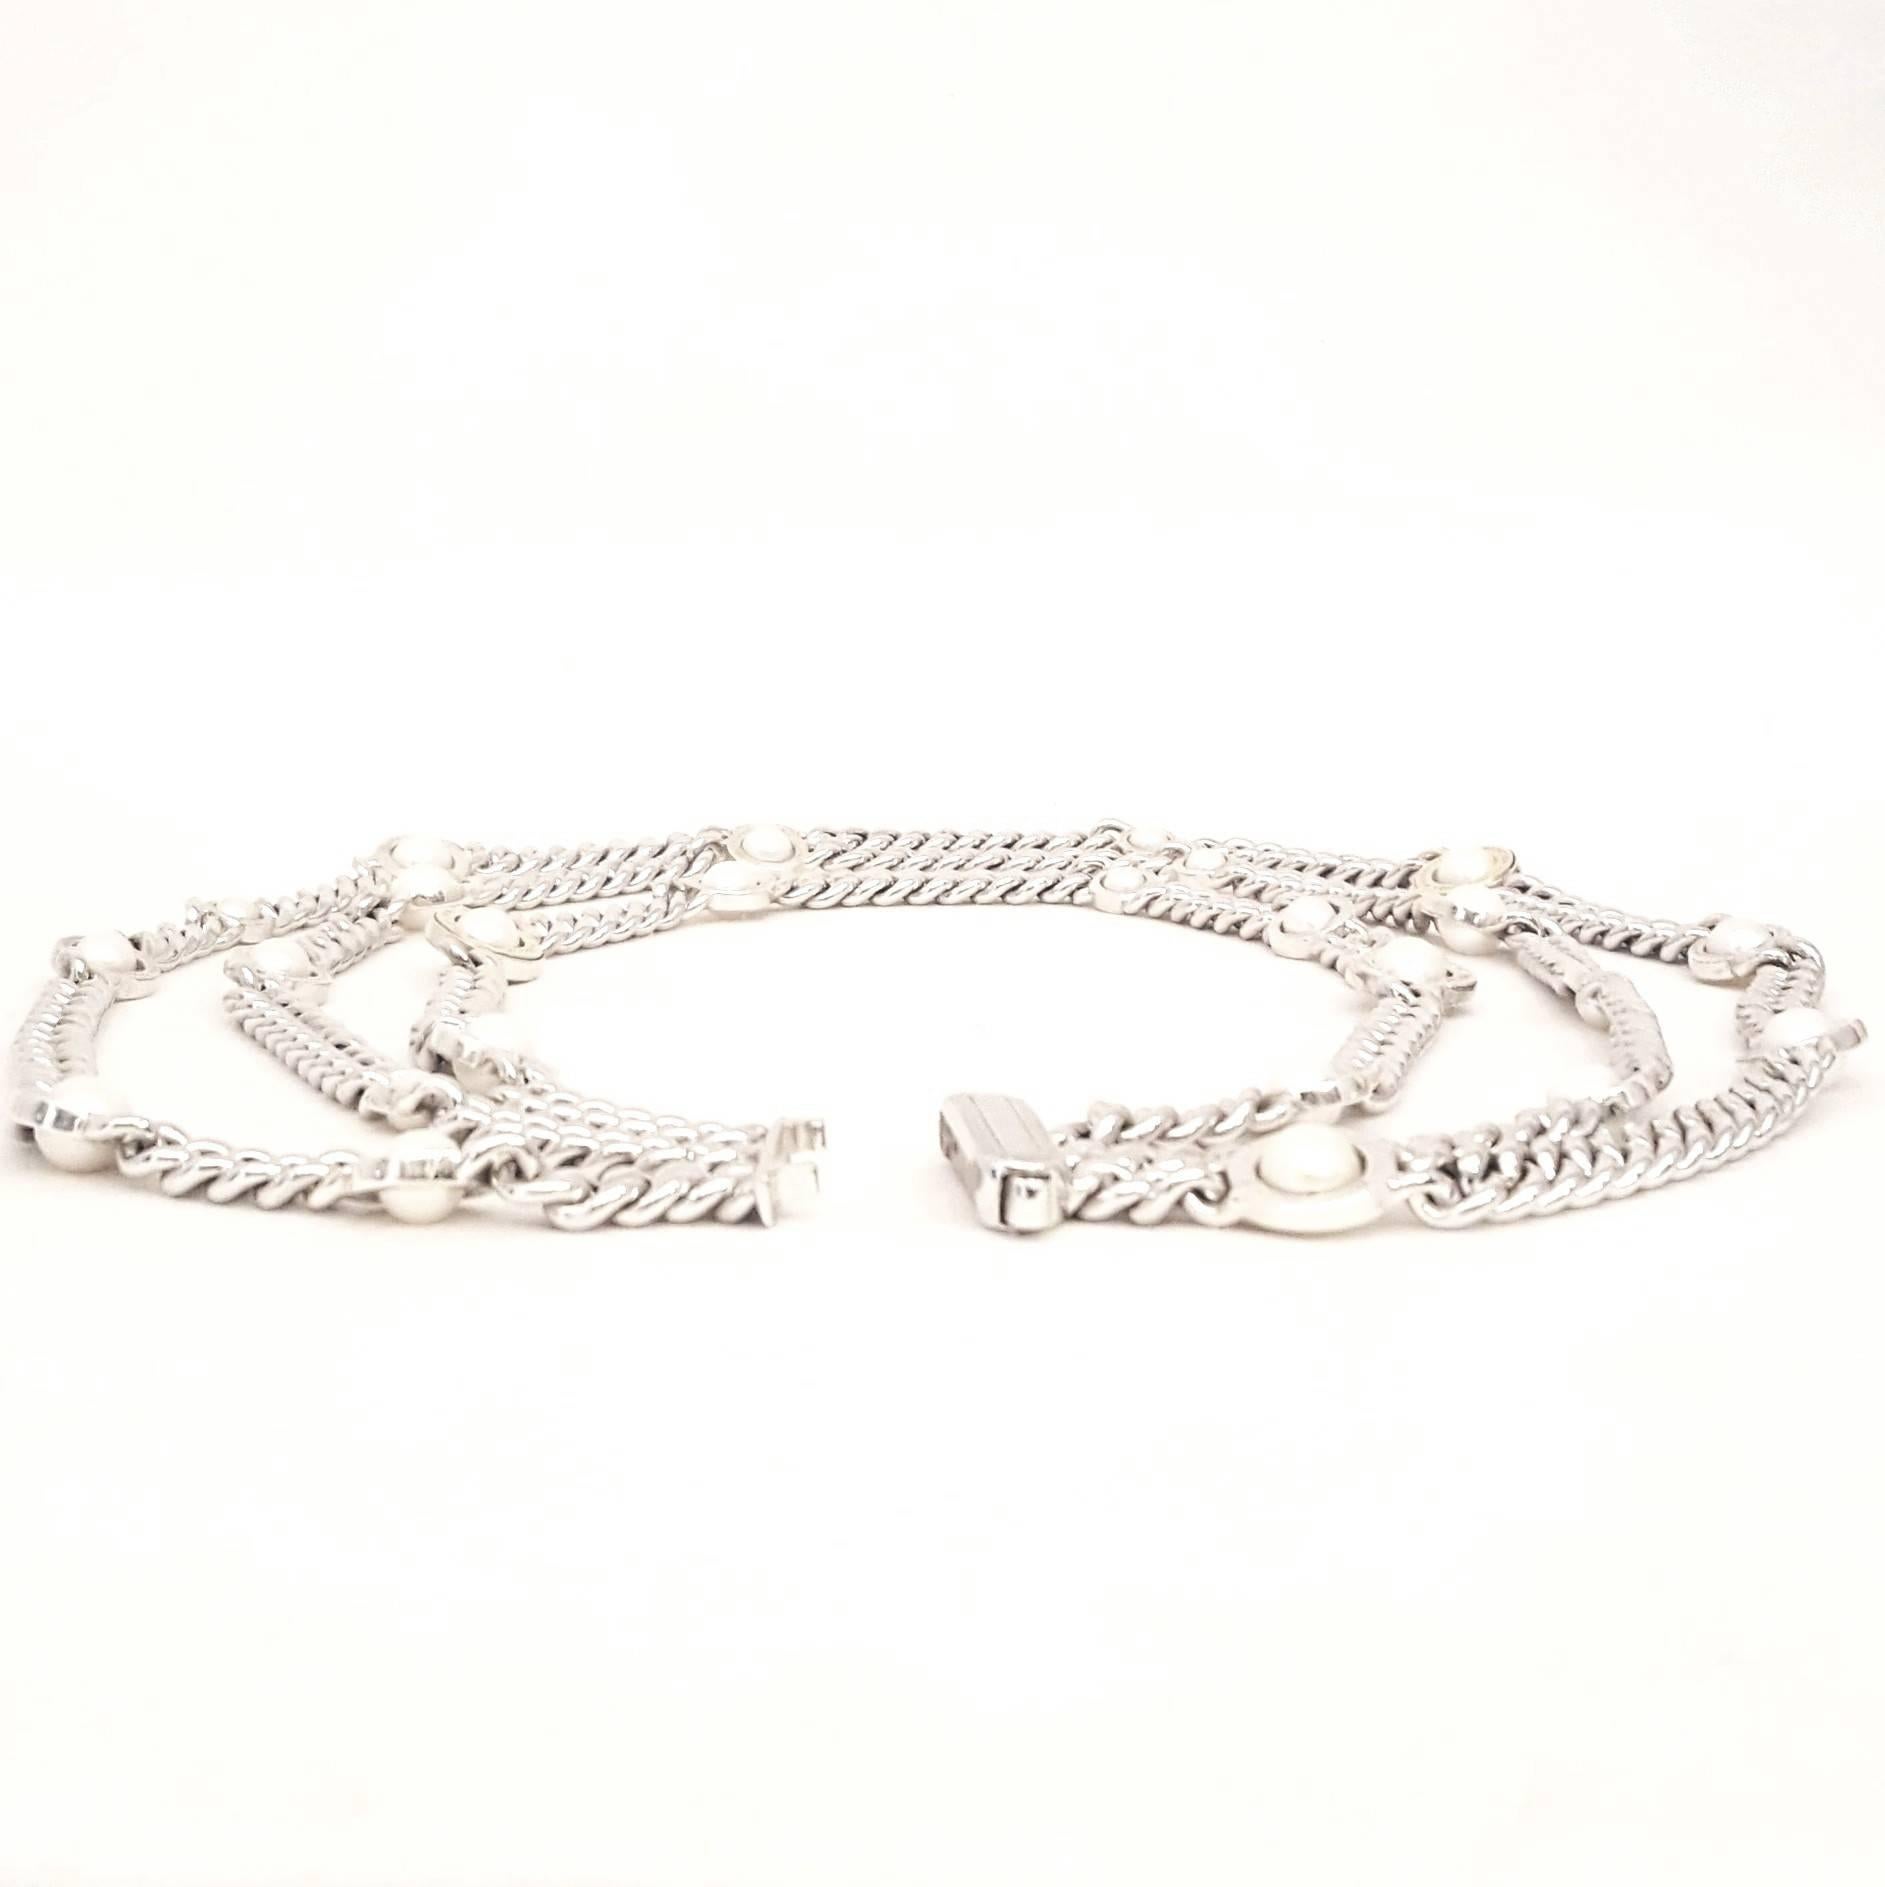 Franco Pianegonda is an artist, sculptor and artisan from Vicenza, a city renowned for centuries for handmade gold and silver manufacturing. This stunning three strand necklace is a standout example of his artistry.  Curved link sterling silver